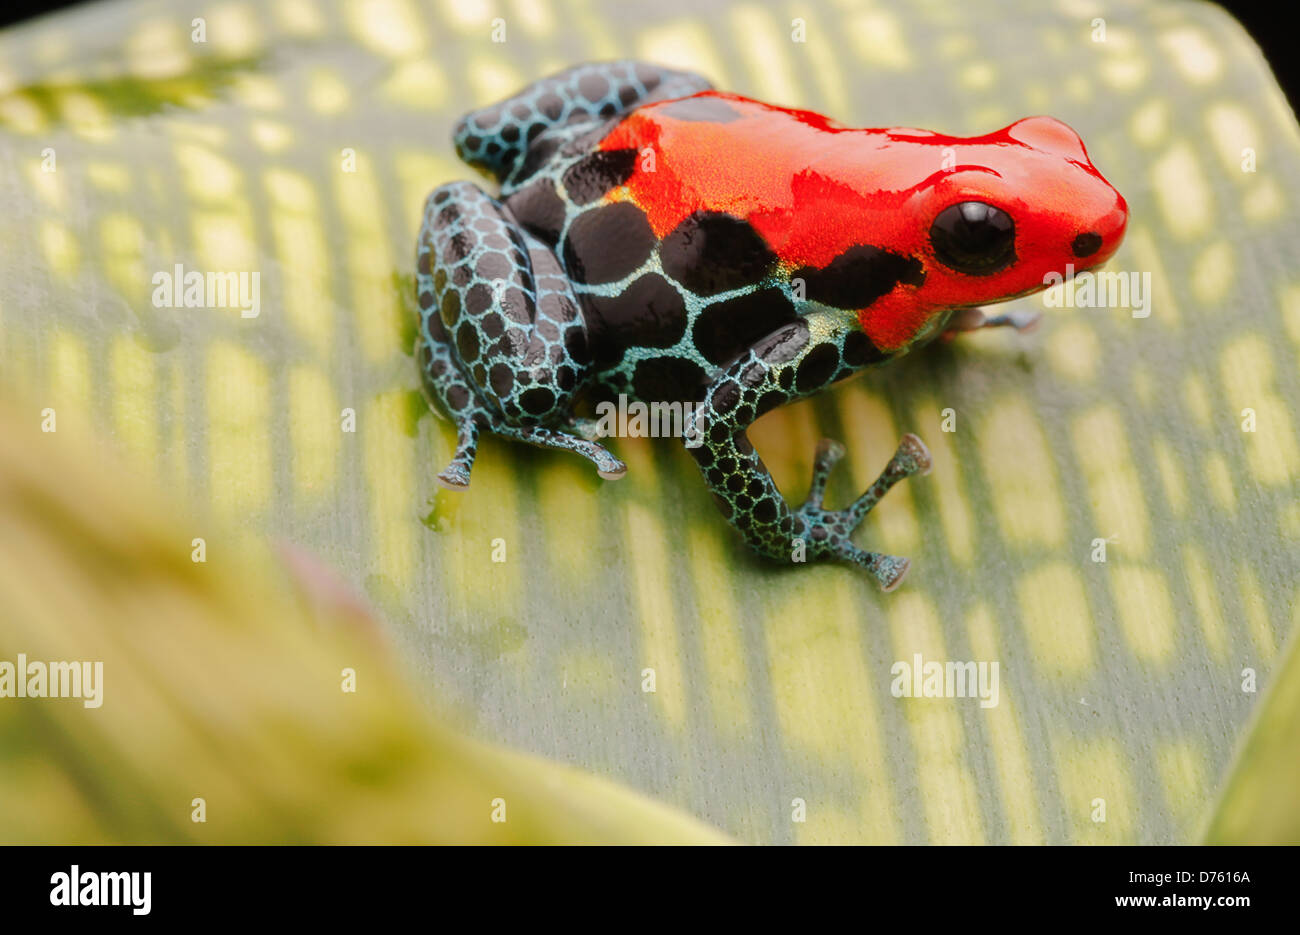 Red tropical poison dart frog, Ranitomeya ventrimaculata, A beautiful cute rain forest animal from the Amazon jungle in Peru and Brazil. Stock Photo